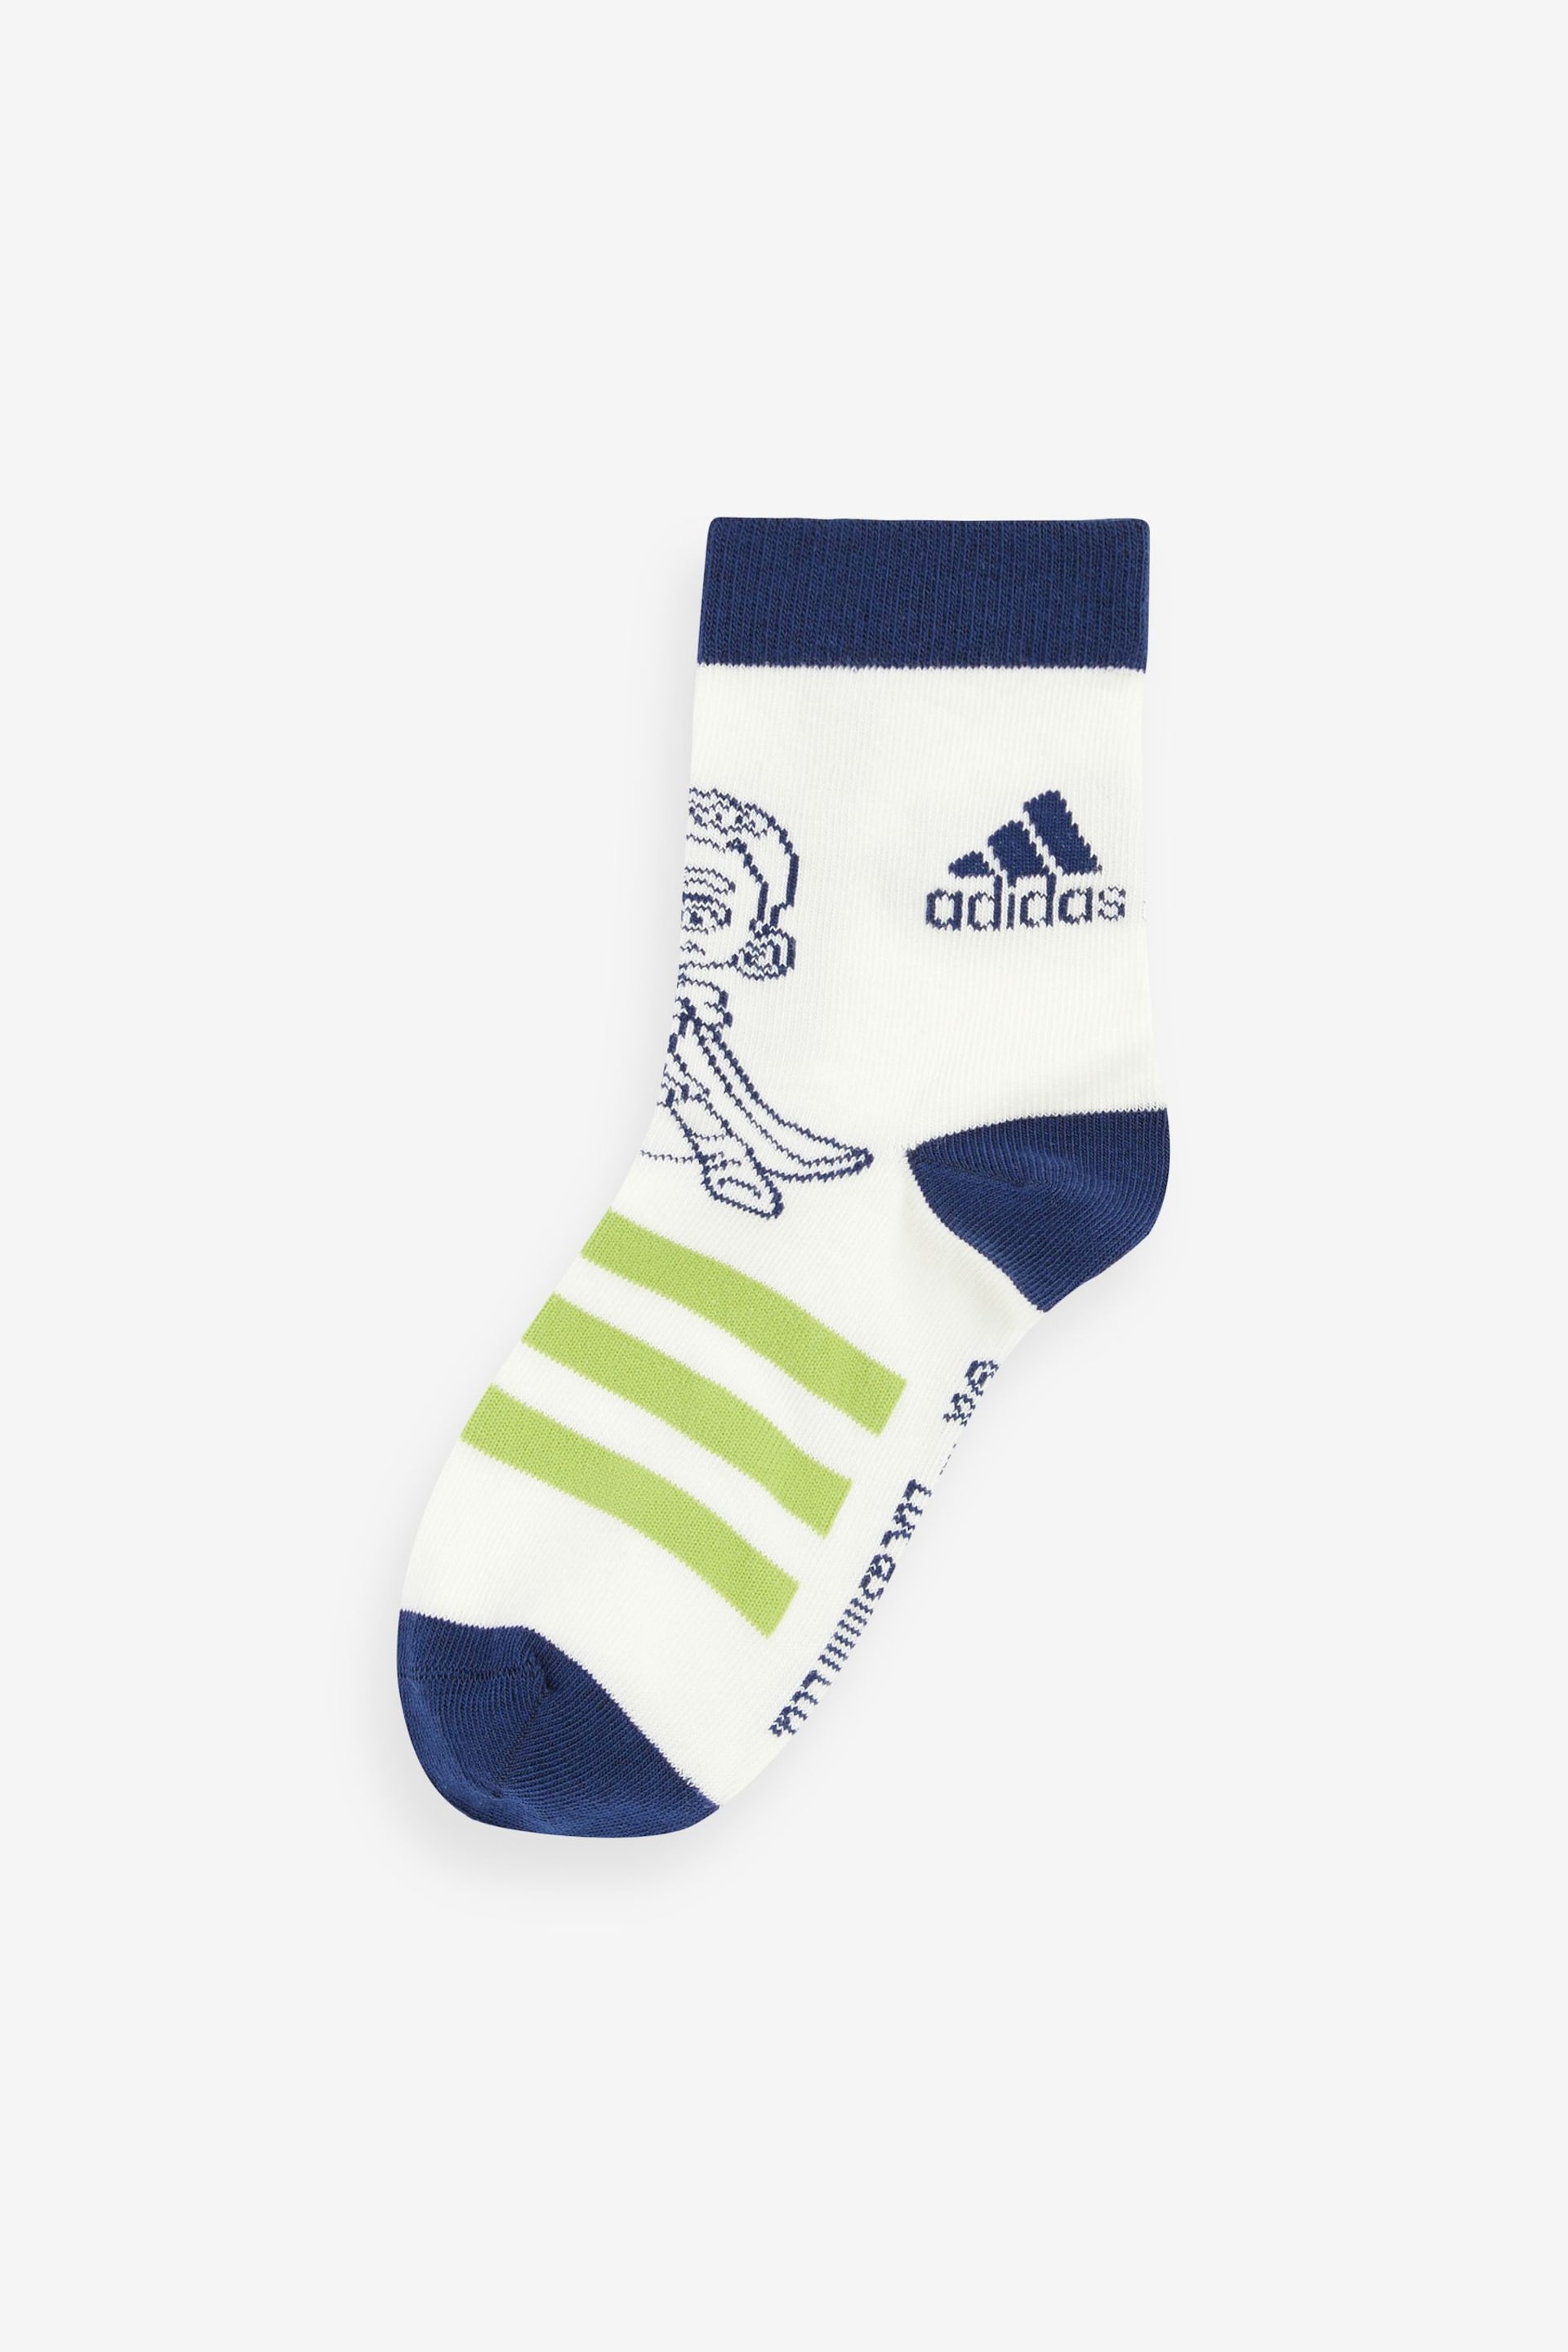 adidas Blue Star Wars Young Jedi Socks 3 Pack - Image 6 of 7